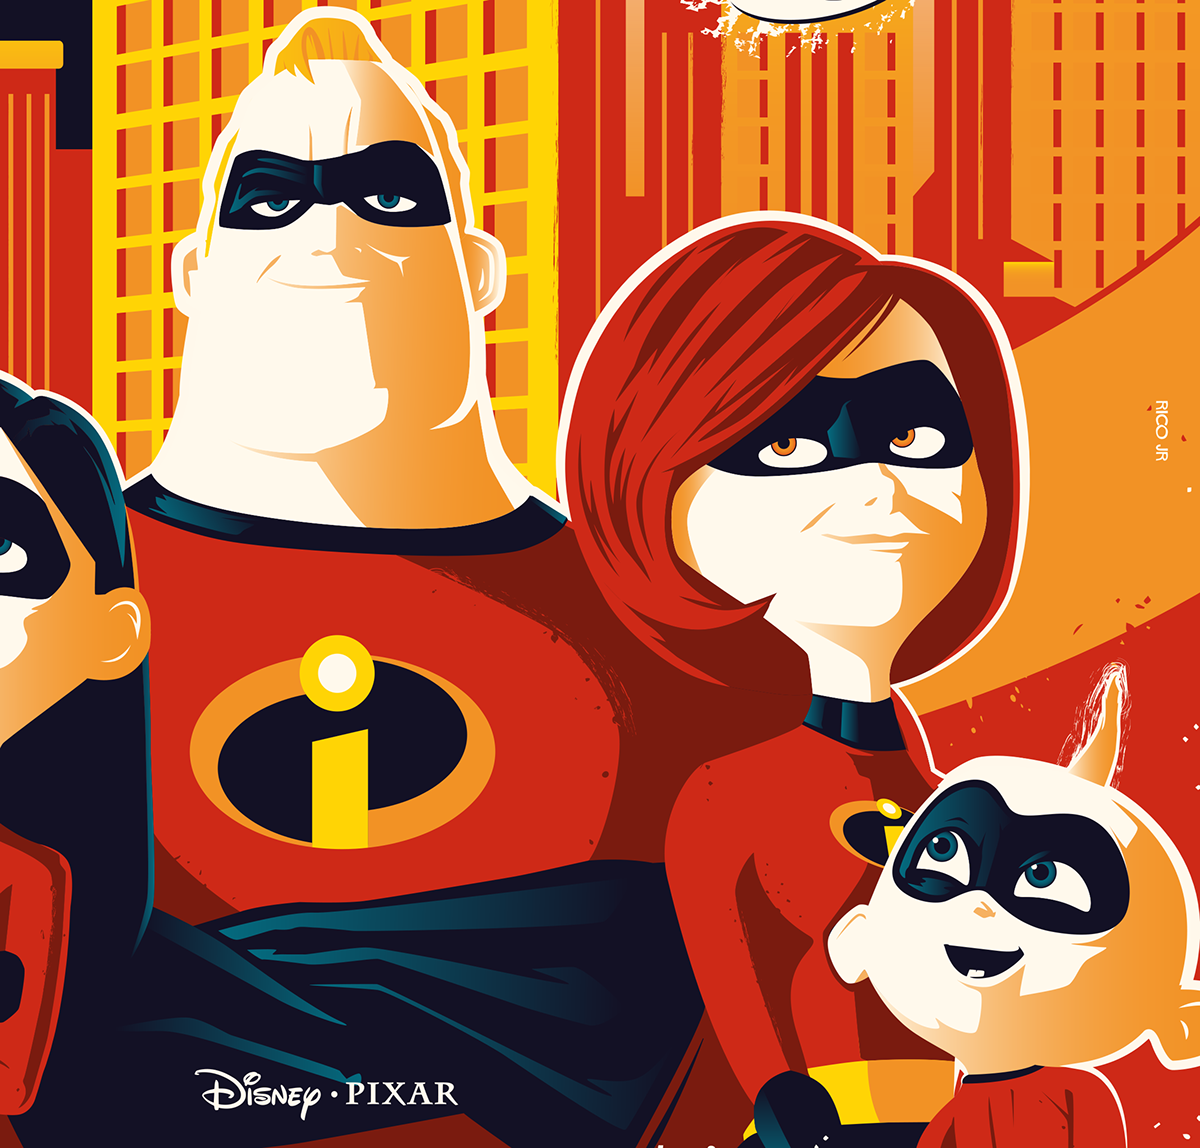 Official THE INCREDIBLES Poster on Behance